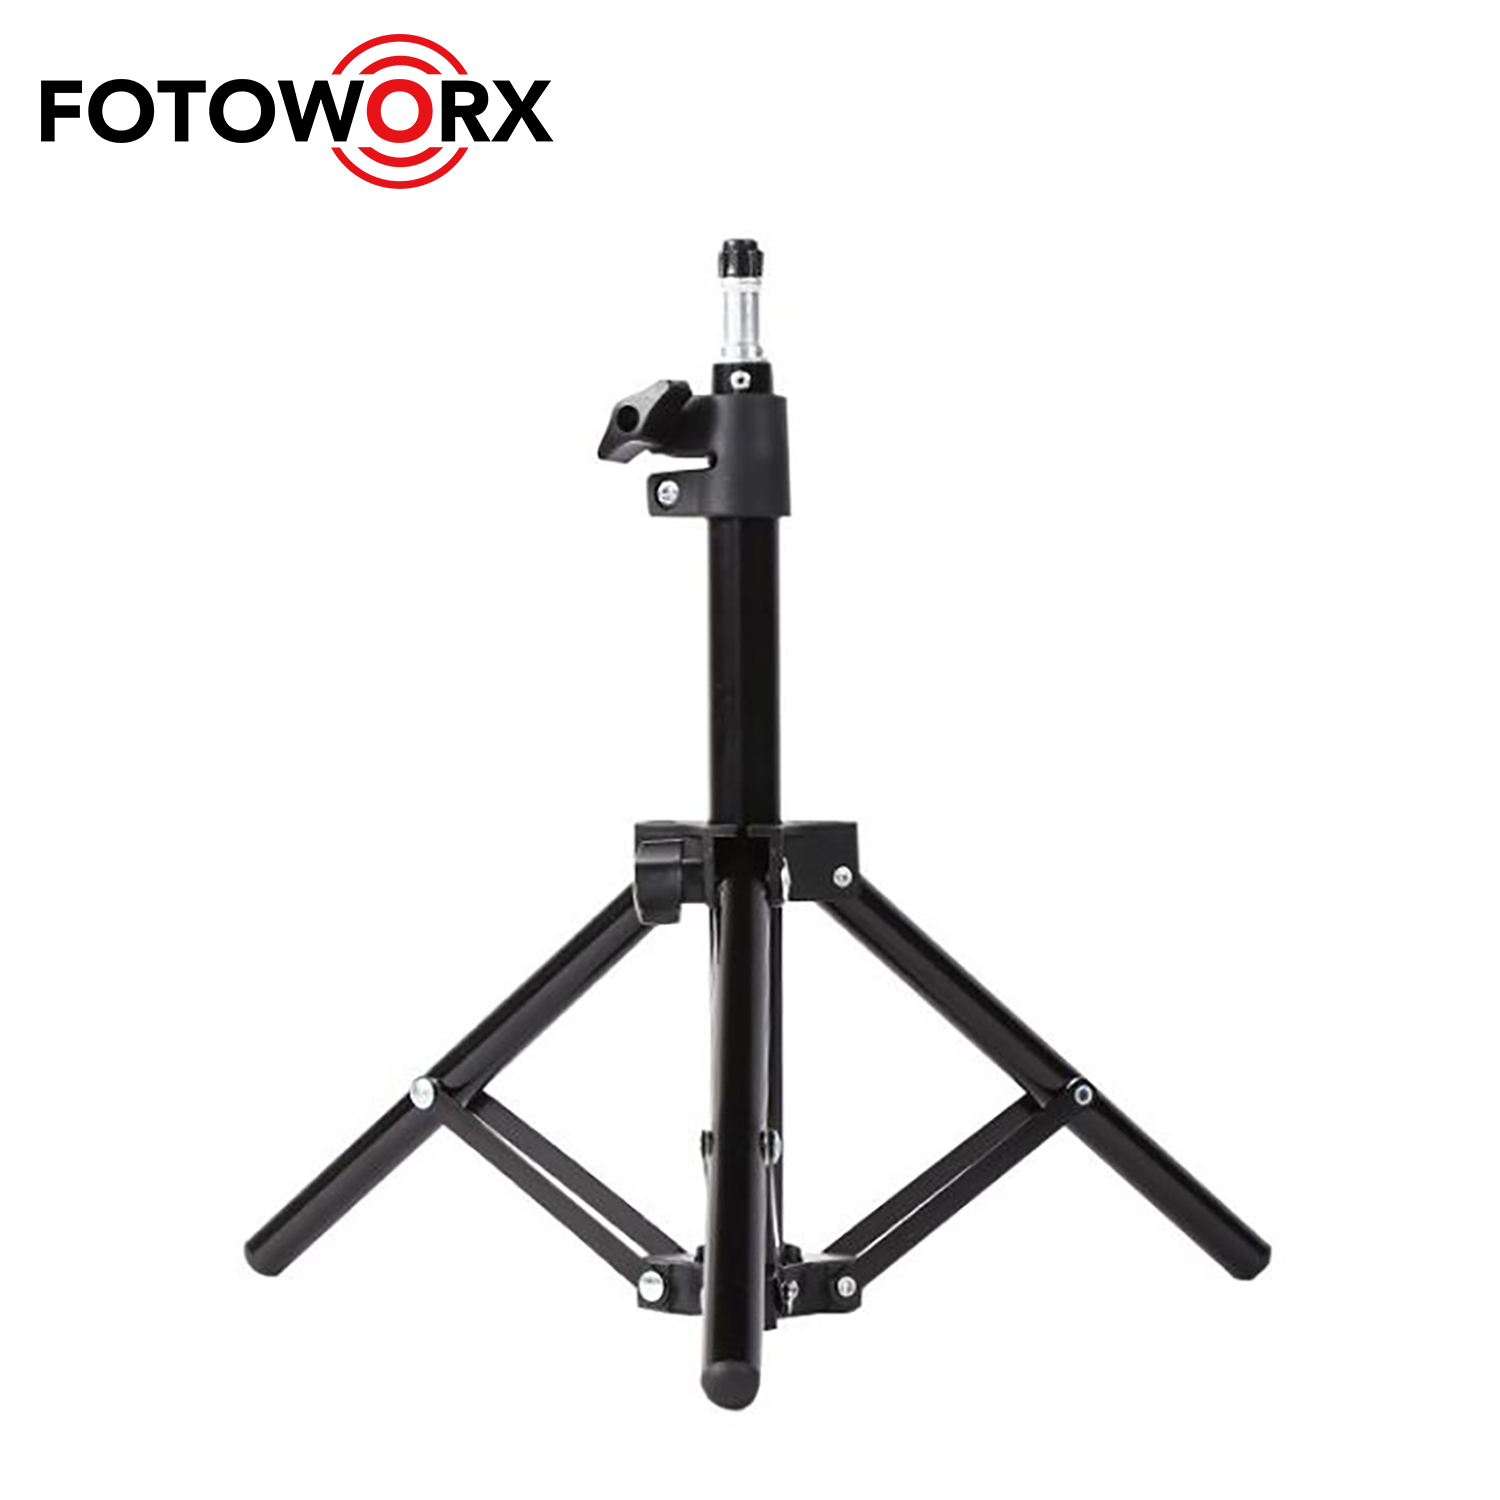 50cm Light Weight Aluminum alloy Foldable Portable Photography Light Stand